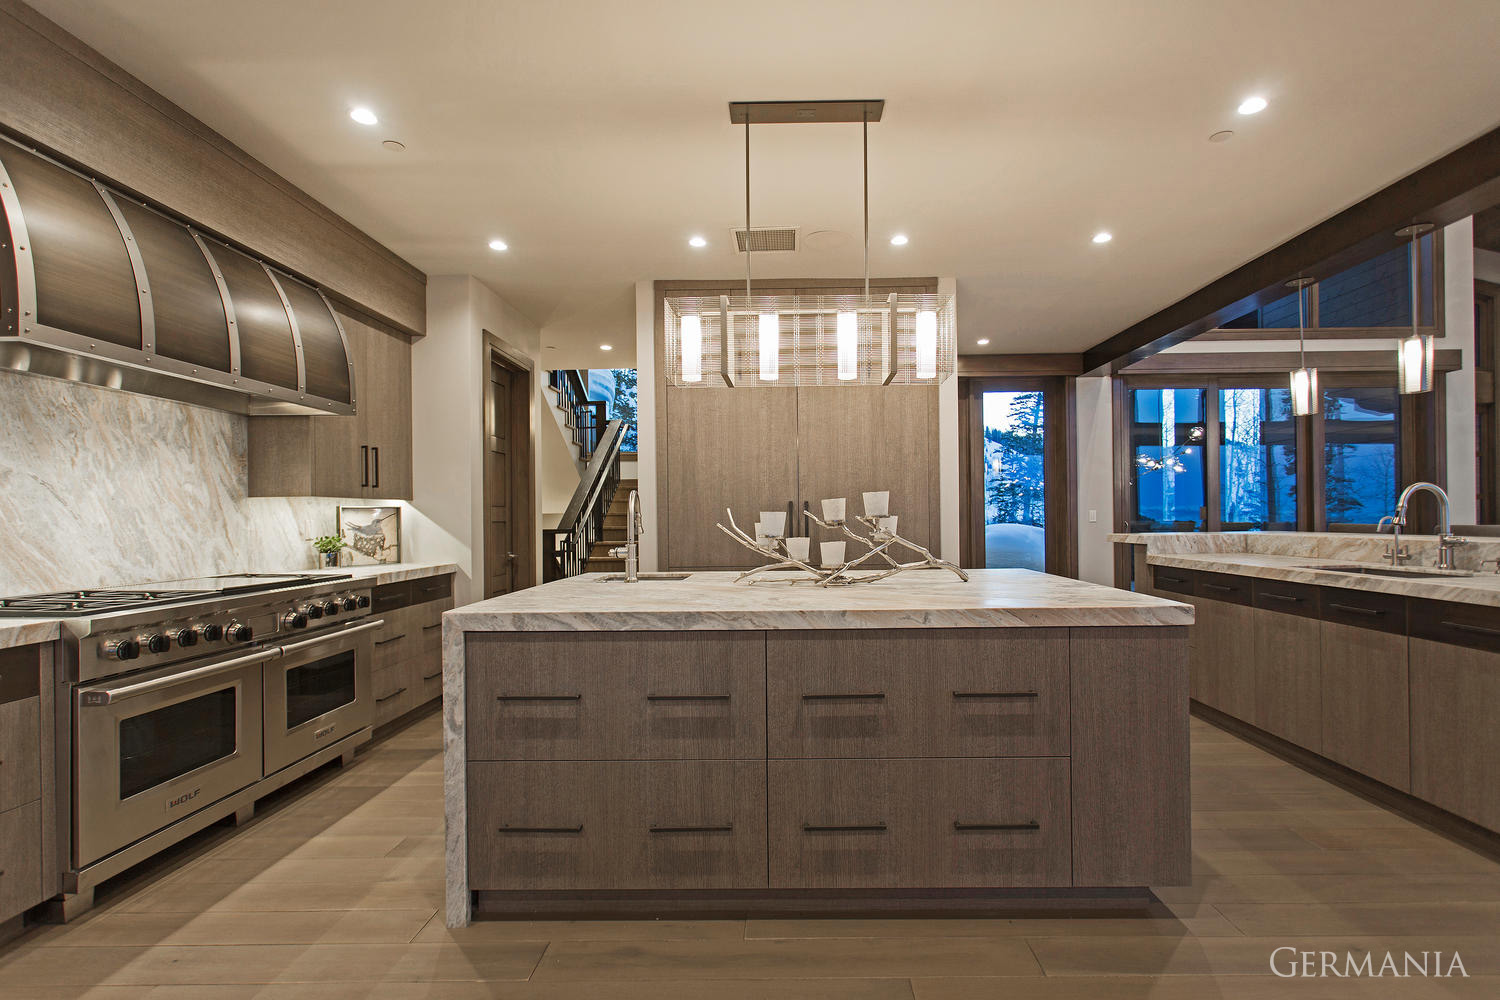 Vacation home kitchen design is a crucial component to Germania Construction luxury homes. From range hoods to light fixtures, each element of your custom home is important to Germania.